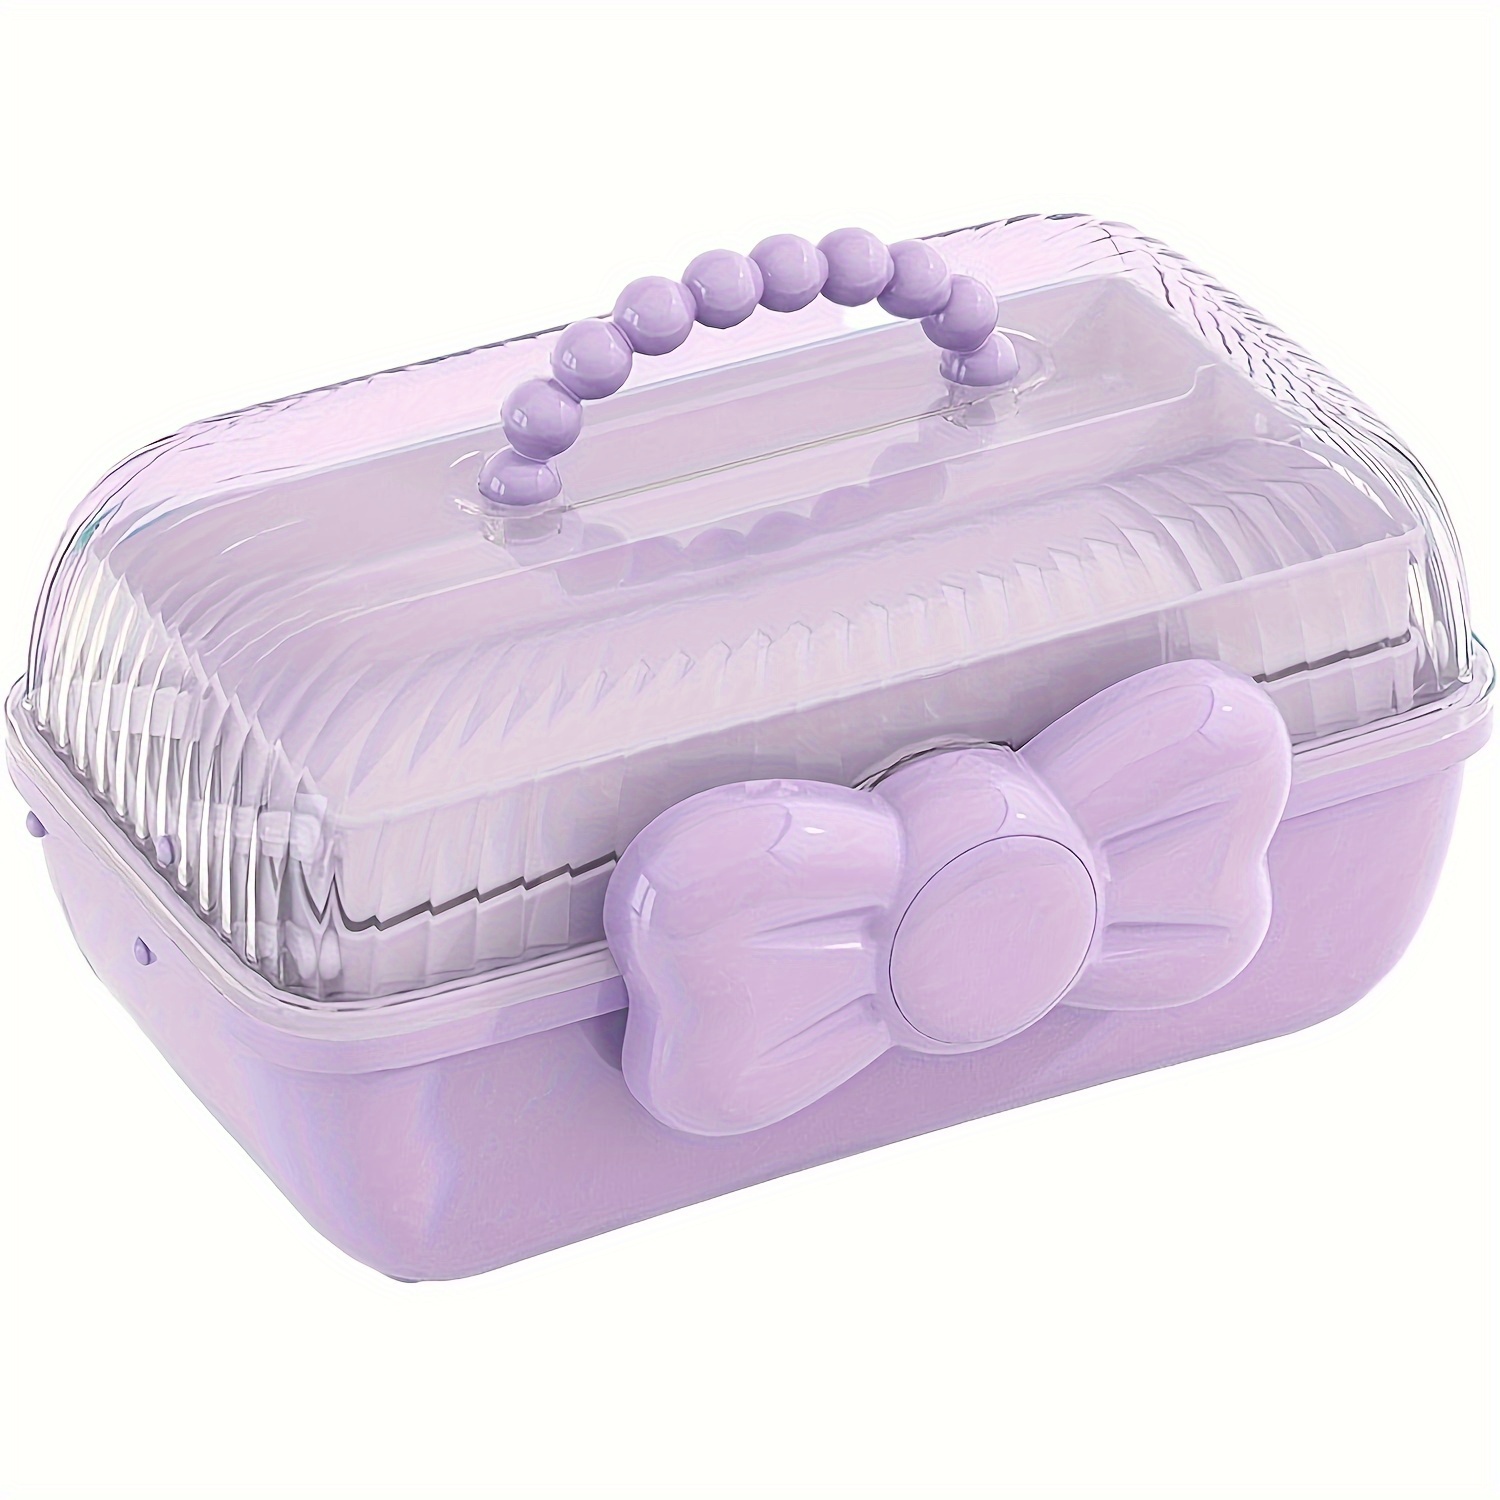 

1pc Plastic Multi-layer Storage Box, Multipurpose Organizer With Handle & Bow Design, Suitable For Nail, Hair Accessories, Sewing Supplies, Makeup Storage